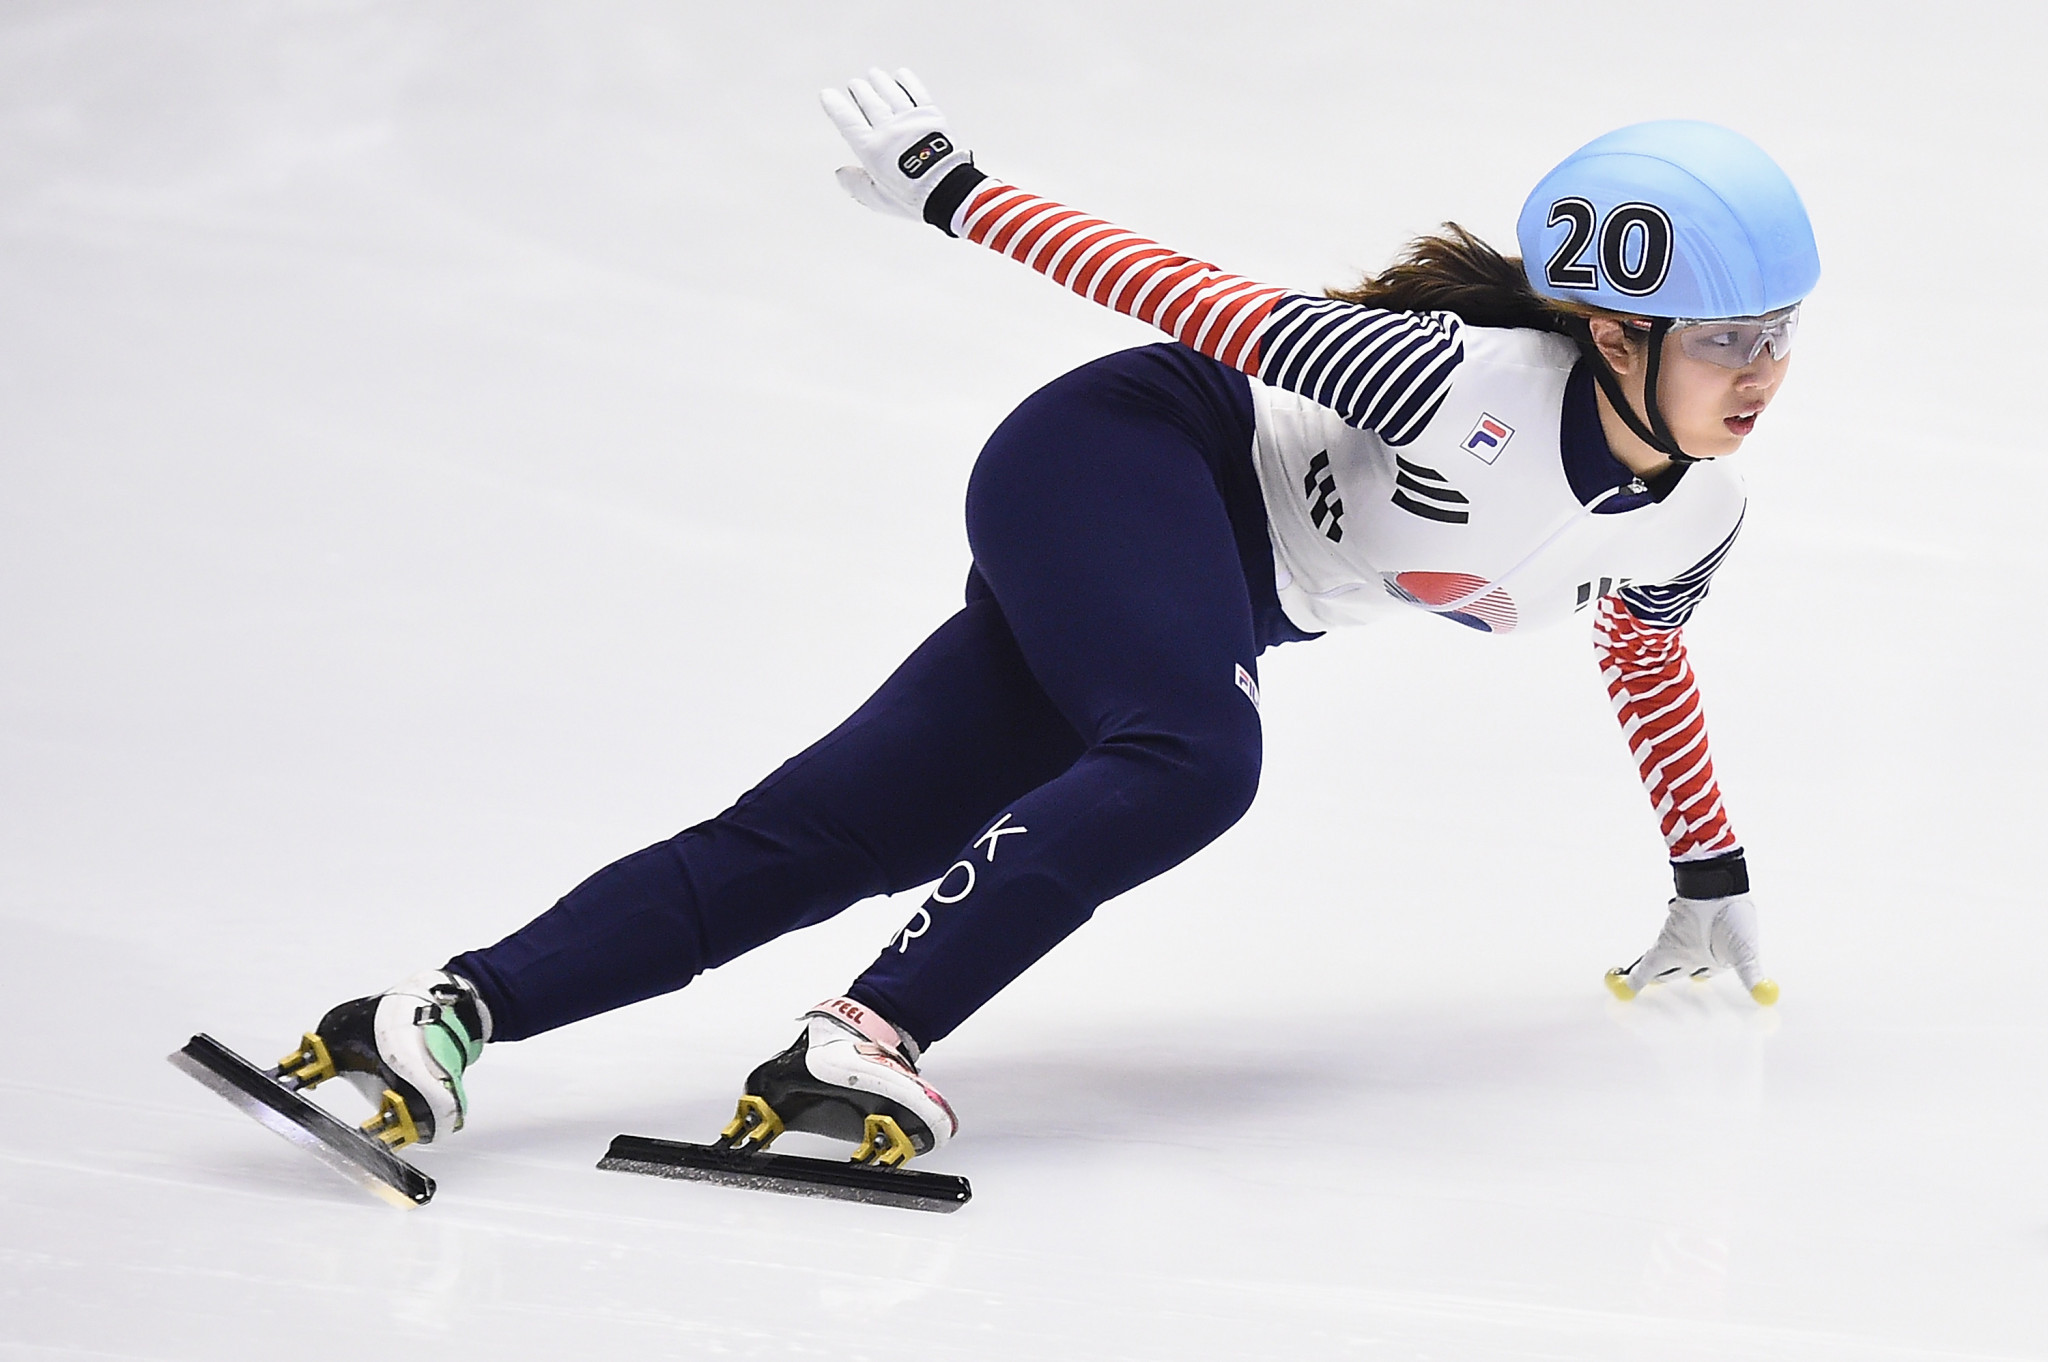 Lausanne 2020 champions to compete at ISU Short Track World Junior